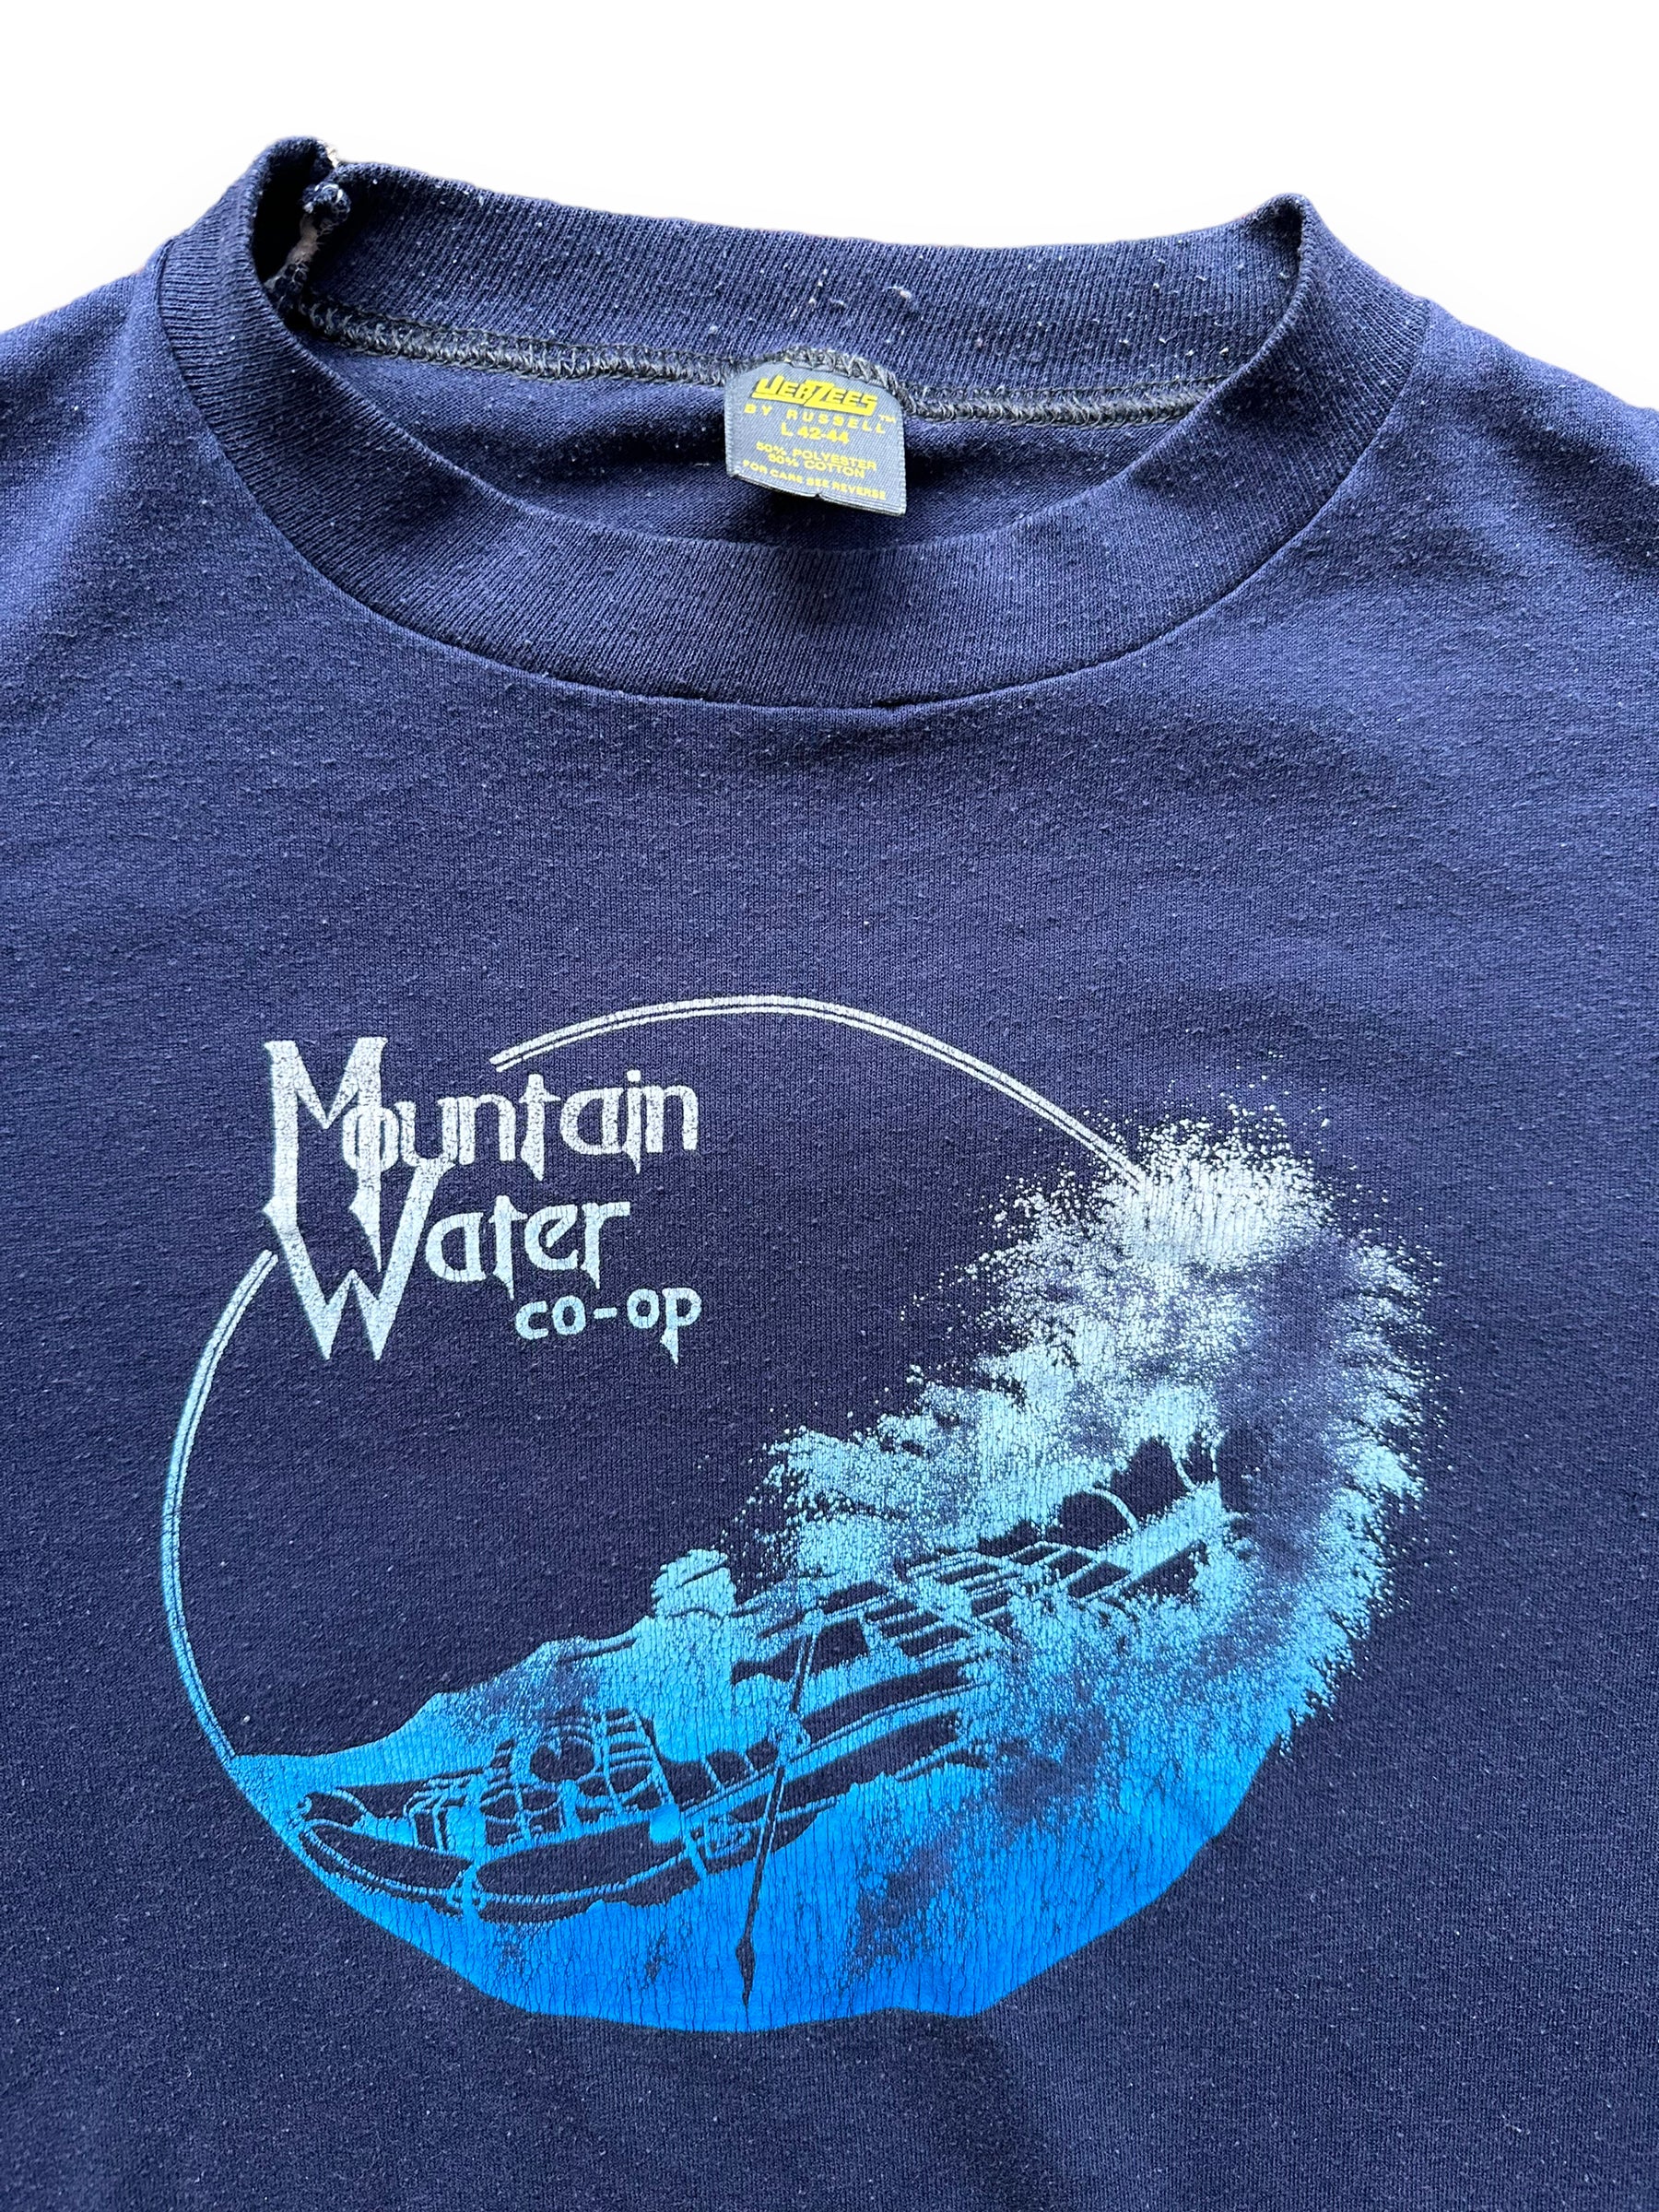 Vintage Mountain Water Co-op Tee SZ L | Vintage Graphic T-Shirts Seatt –  The Barn Owl | 